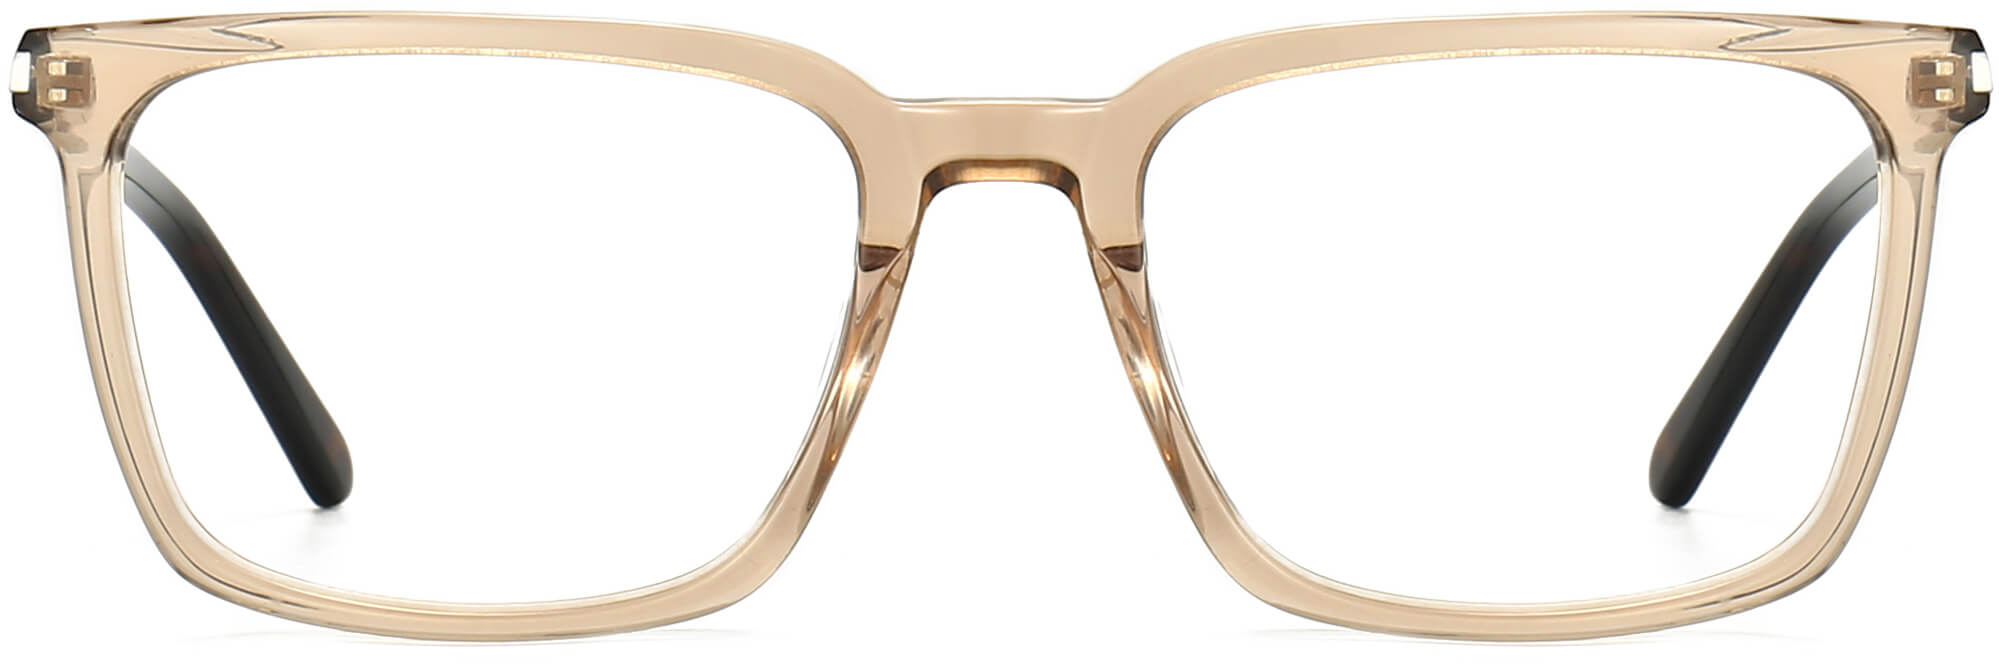 Yusuf Square Brown Eyeglasses from ANRRI, front view